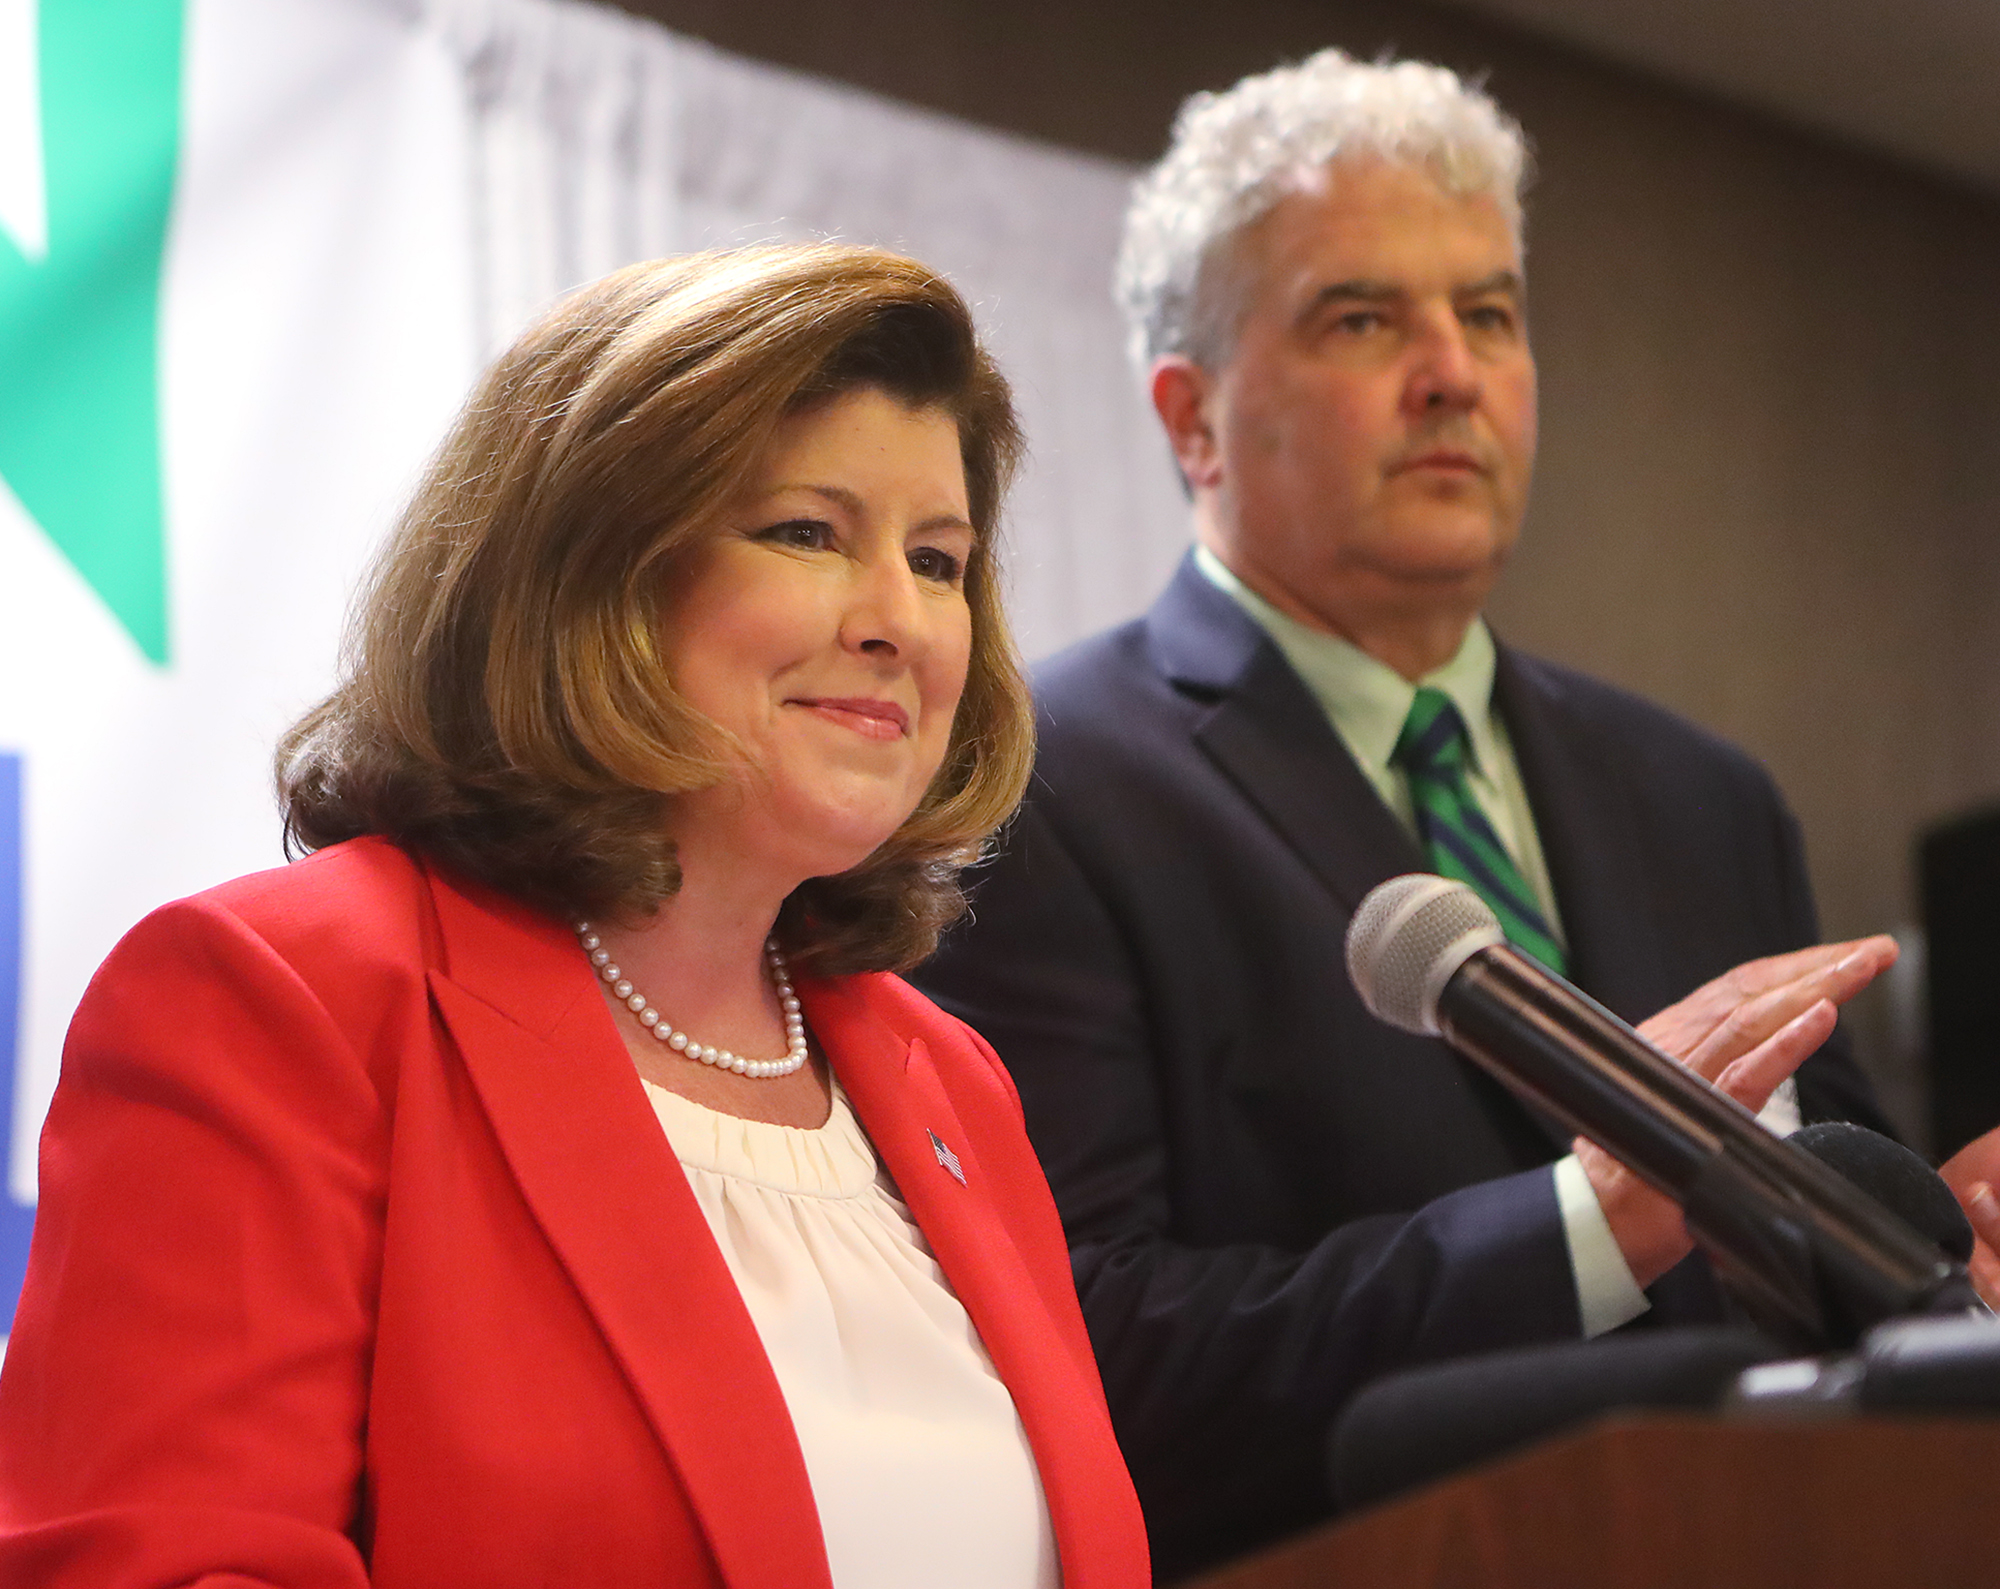 The local take on Karen Handel’s decision to skip a Sixth District debate